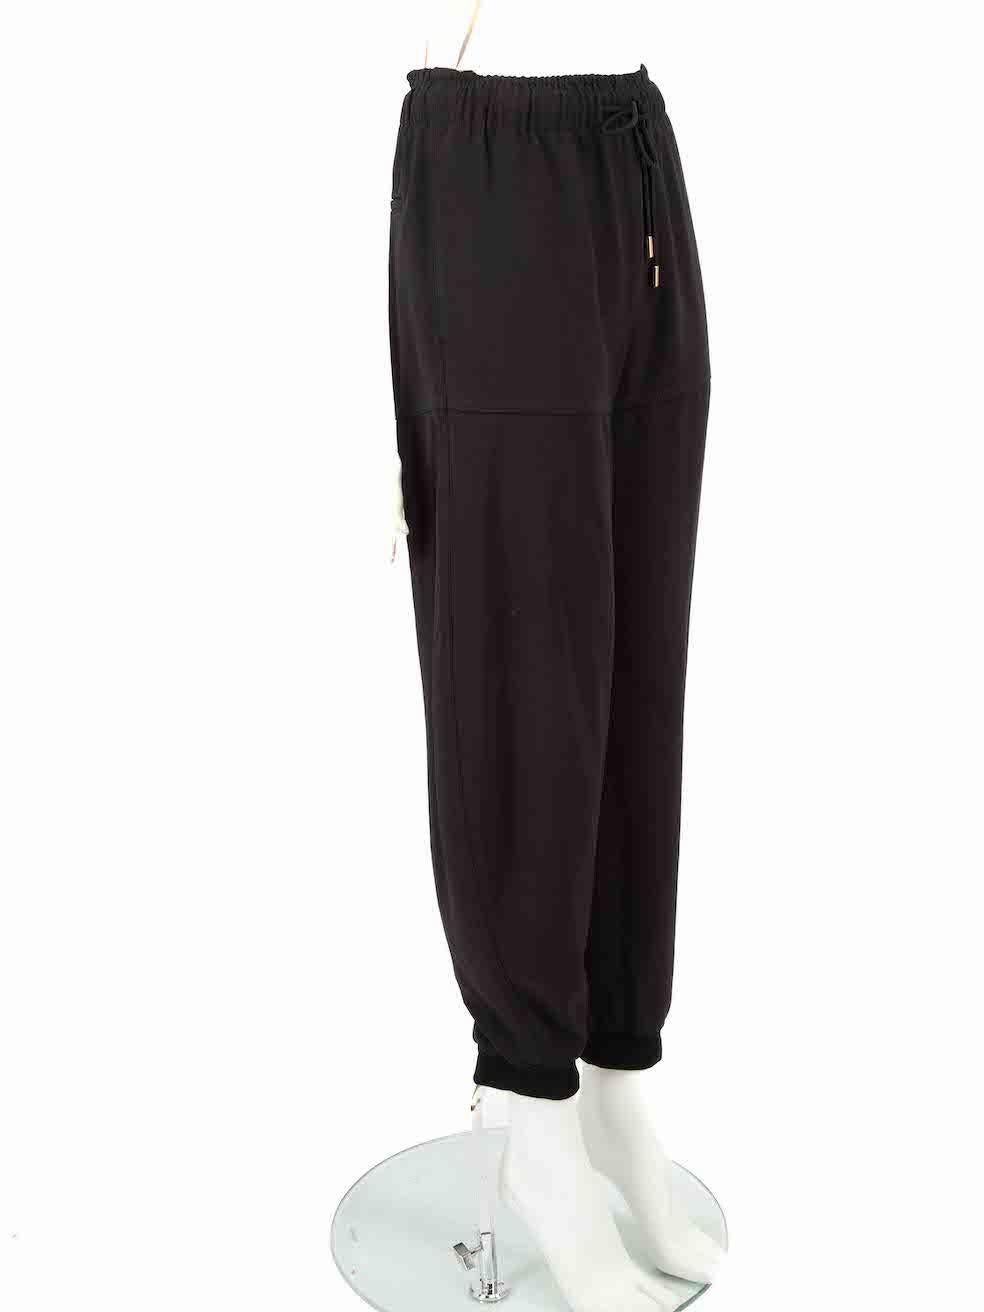 CONDITION is Very good. Minimal wear to trousers is evident. Minimal wear to right side pocket seam where stitching has become undone on this used Chloé designer resale item.
 
 Details
 Black
 Synthetic
 Trousers
 Tapered fit
 Elasticated waistband